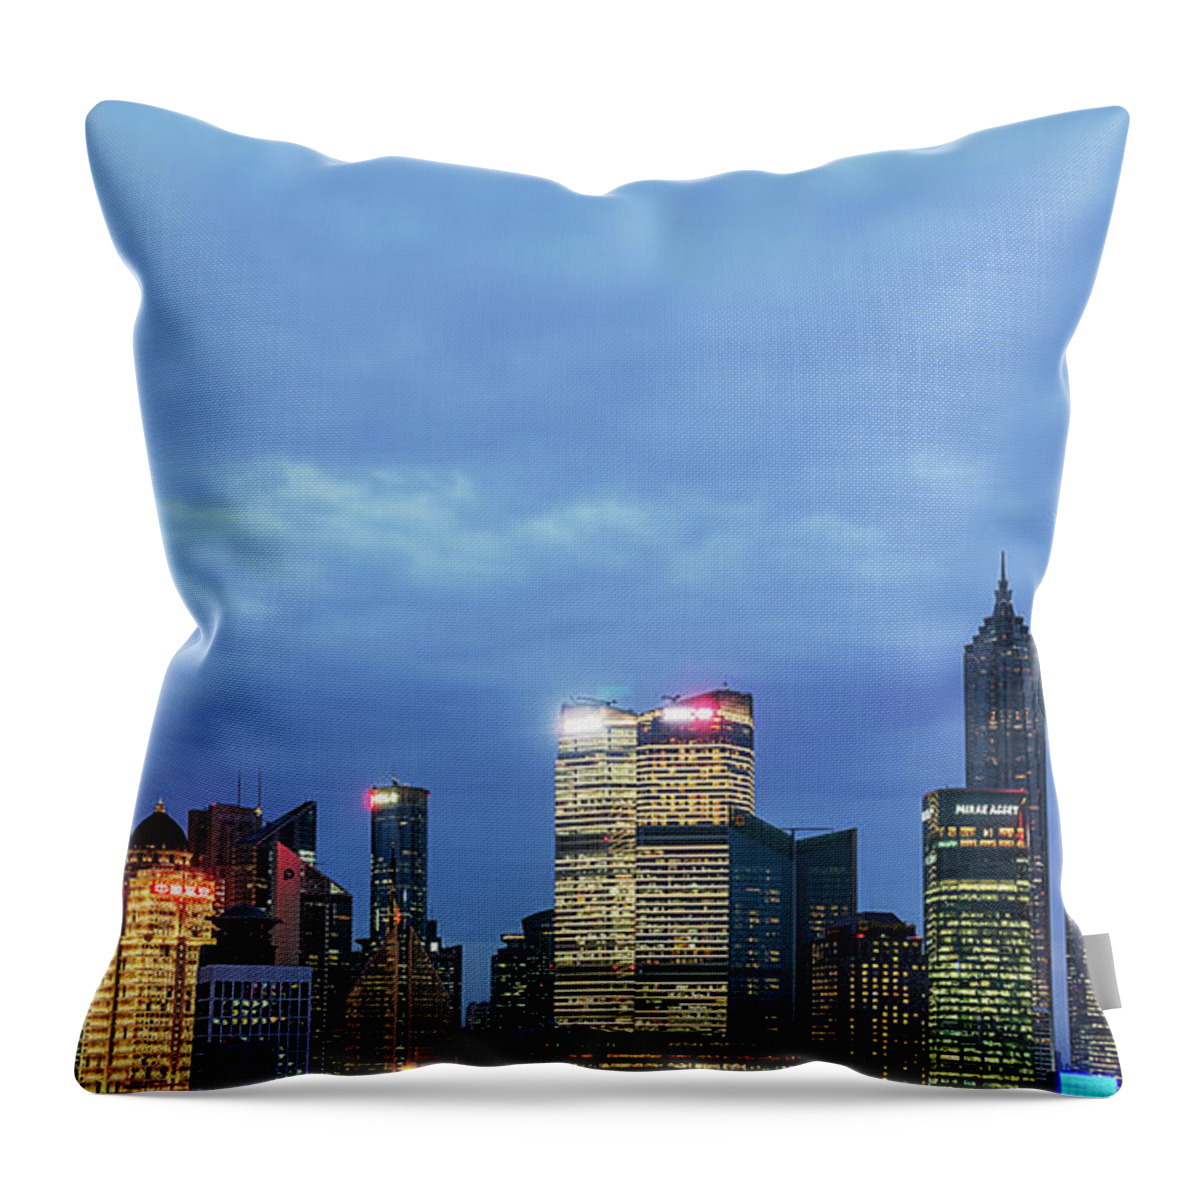 Communications Tower Throw Pillow featuring the photograph Shanghai Skyline by Elysee Shen